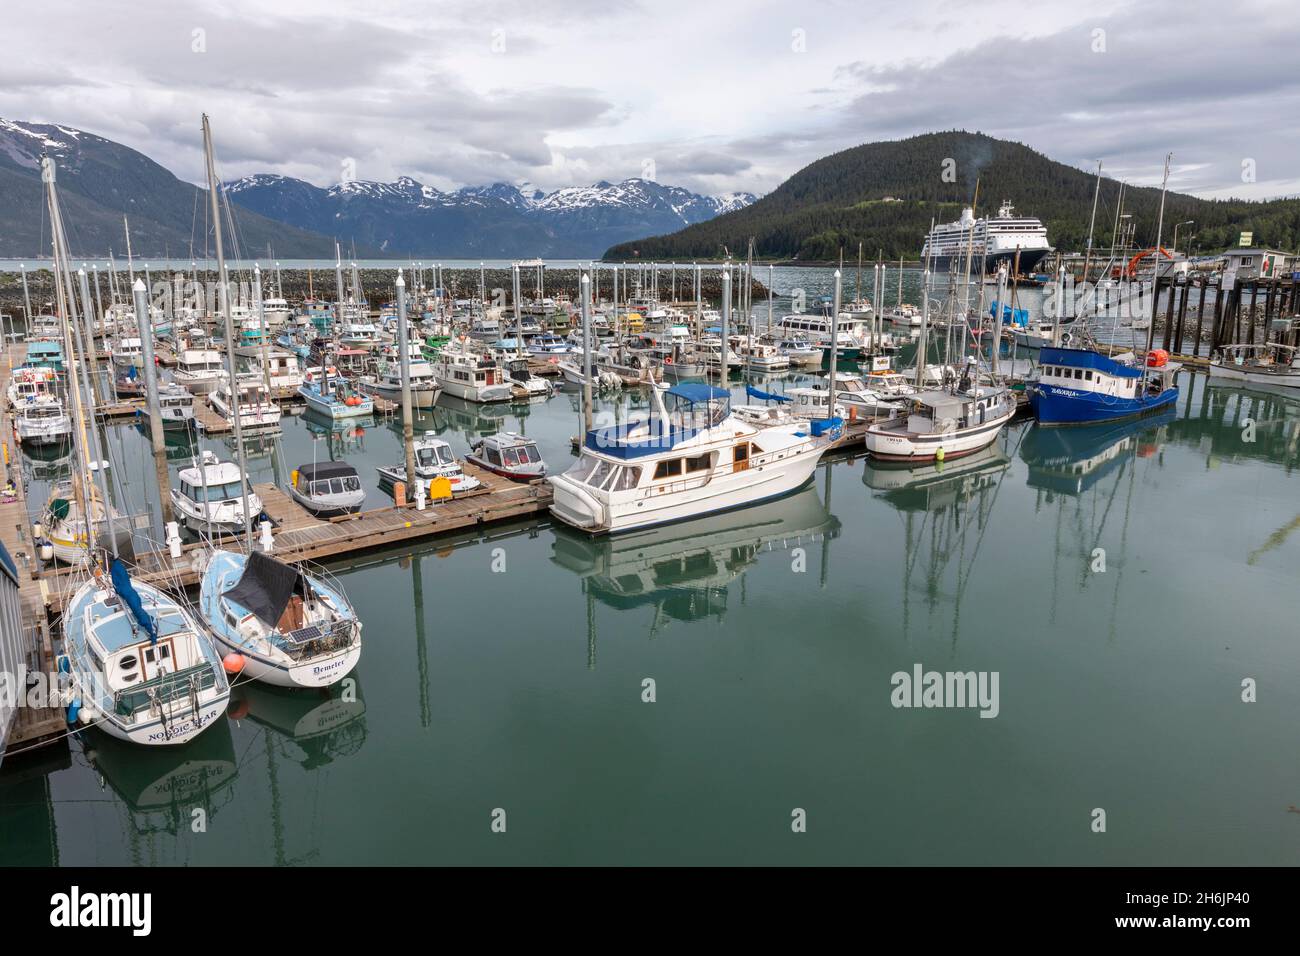 View of the harbor in Haines, Southeast Alaska, United States of America, North America Stock Photo